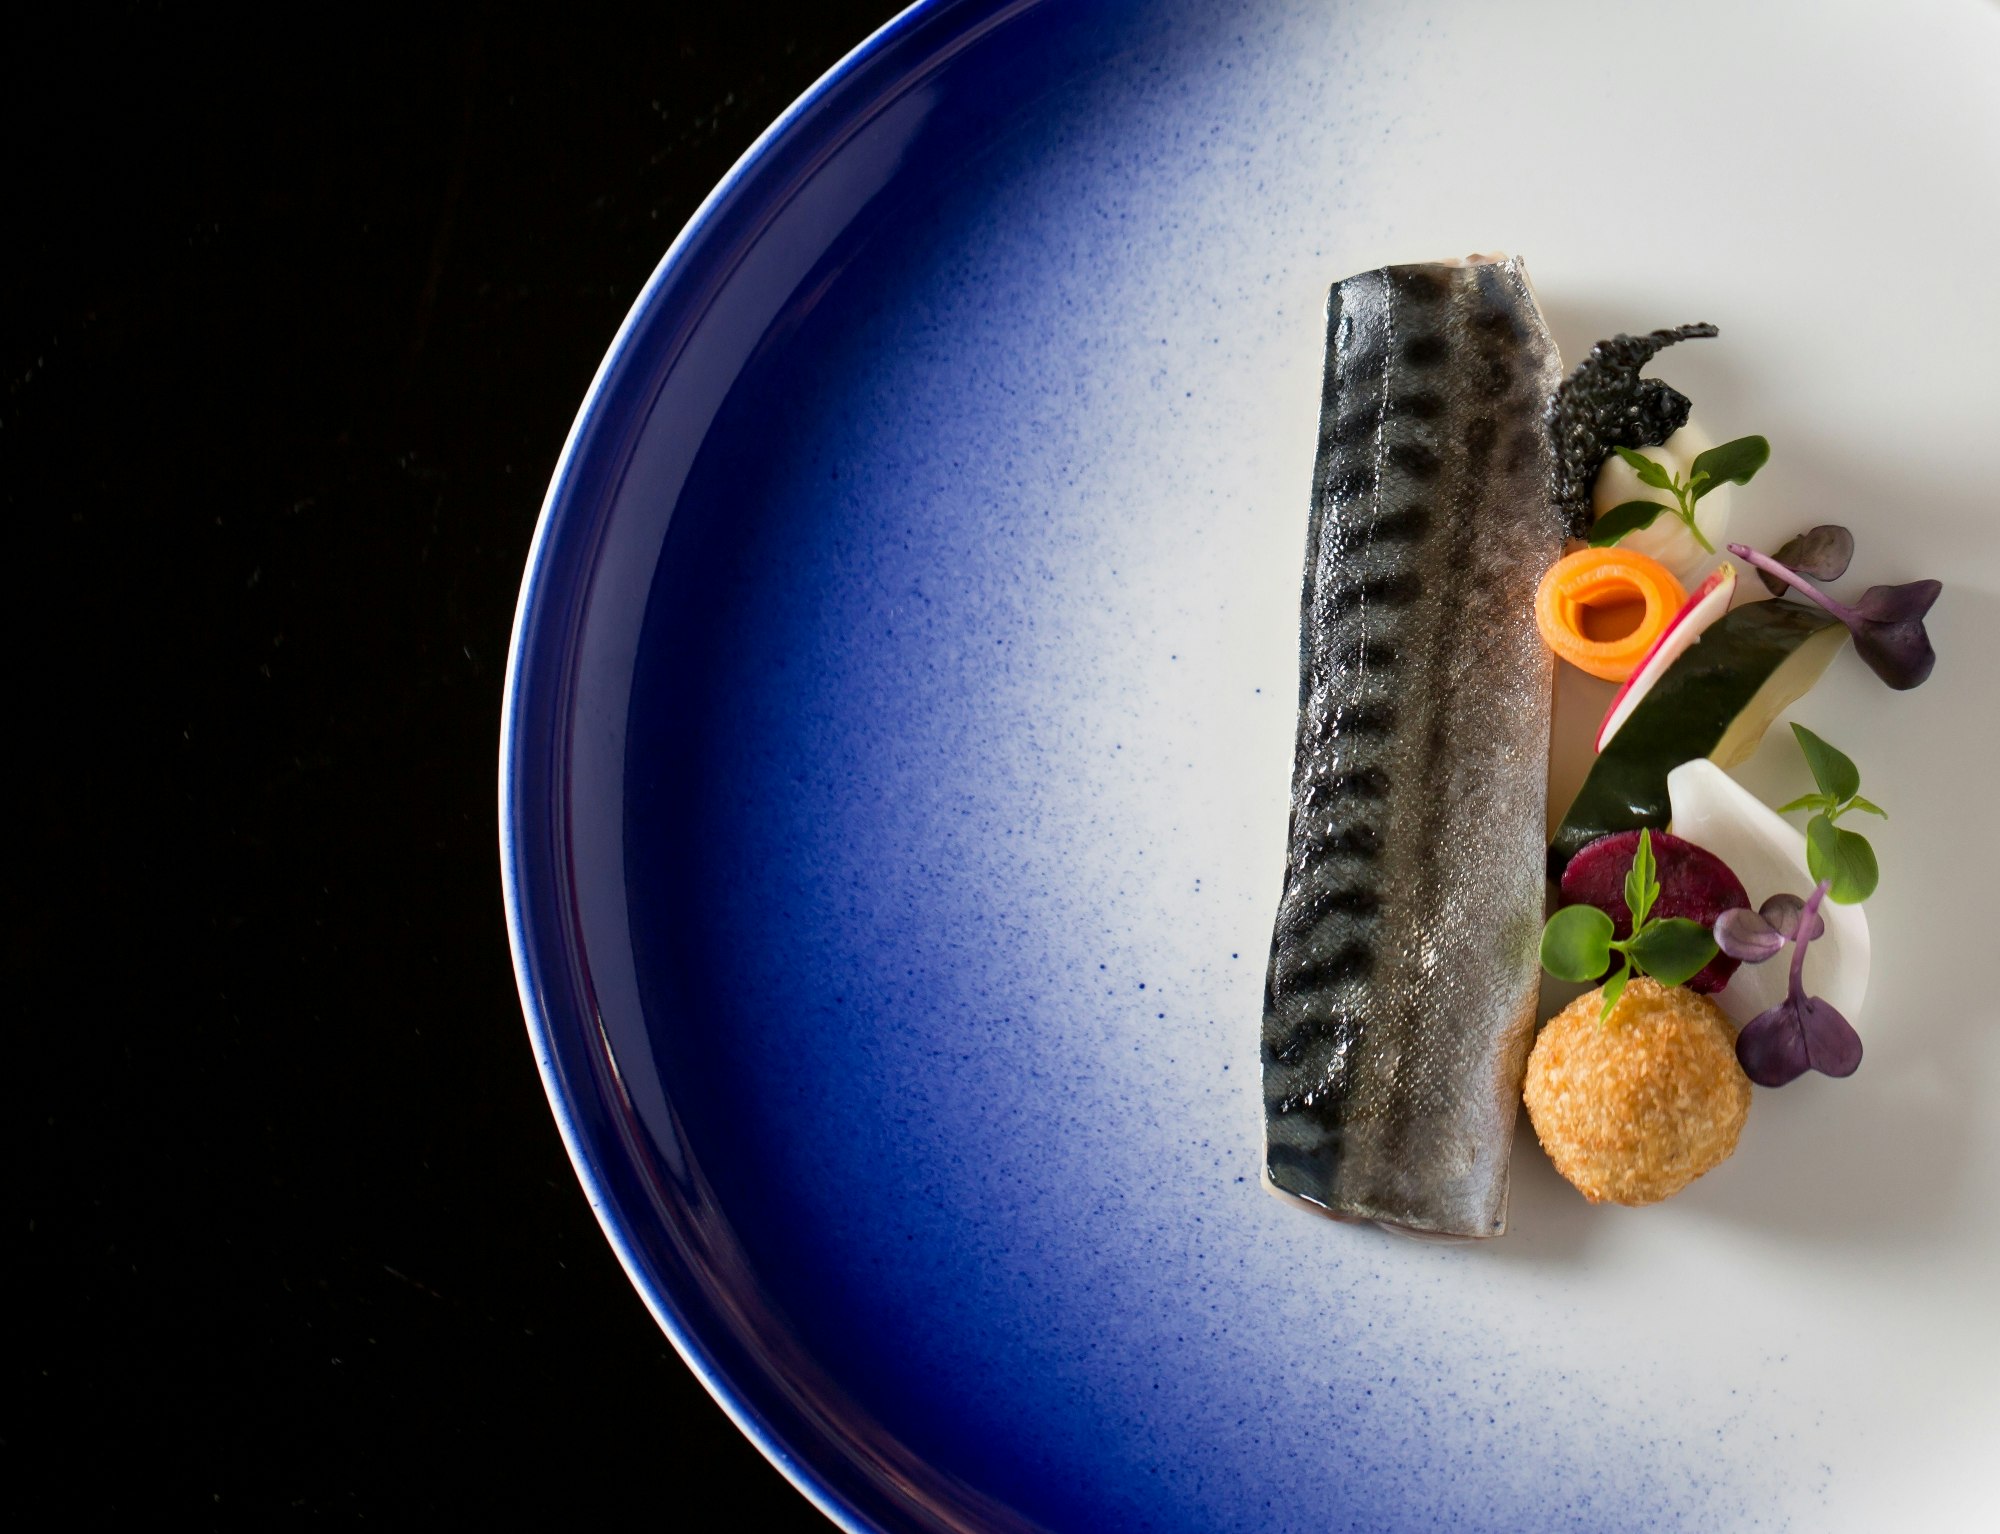 A fillet of mackerel and colorful, seasonal vegetables are arranged artistically on a blue plate at Restaurant 360 in Dubrovnik, Croatia